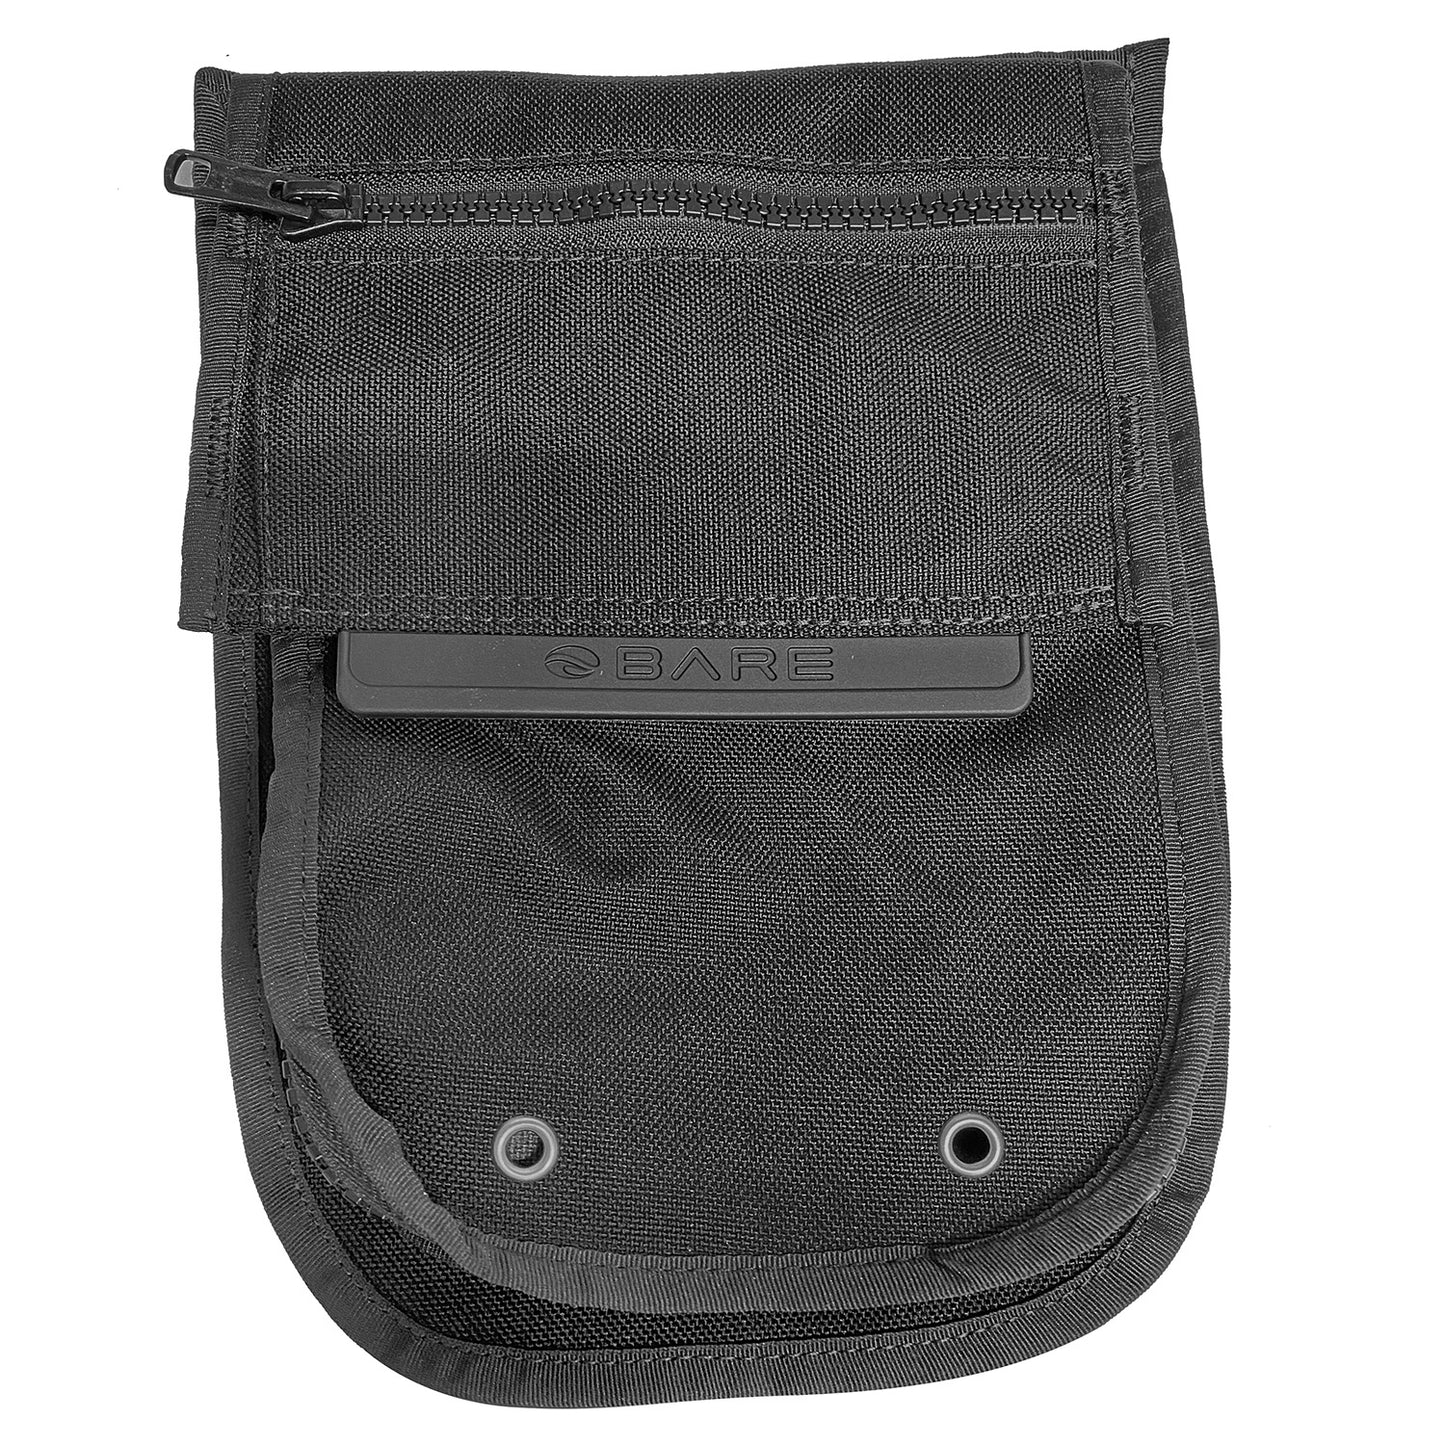 ONLY Tech Pocket with flap zip